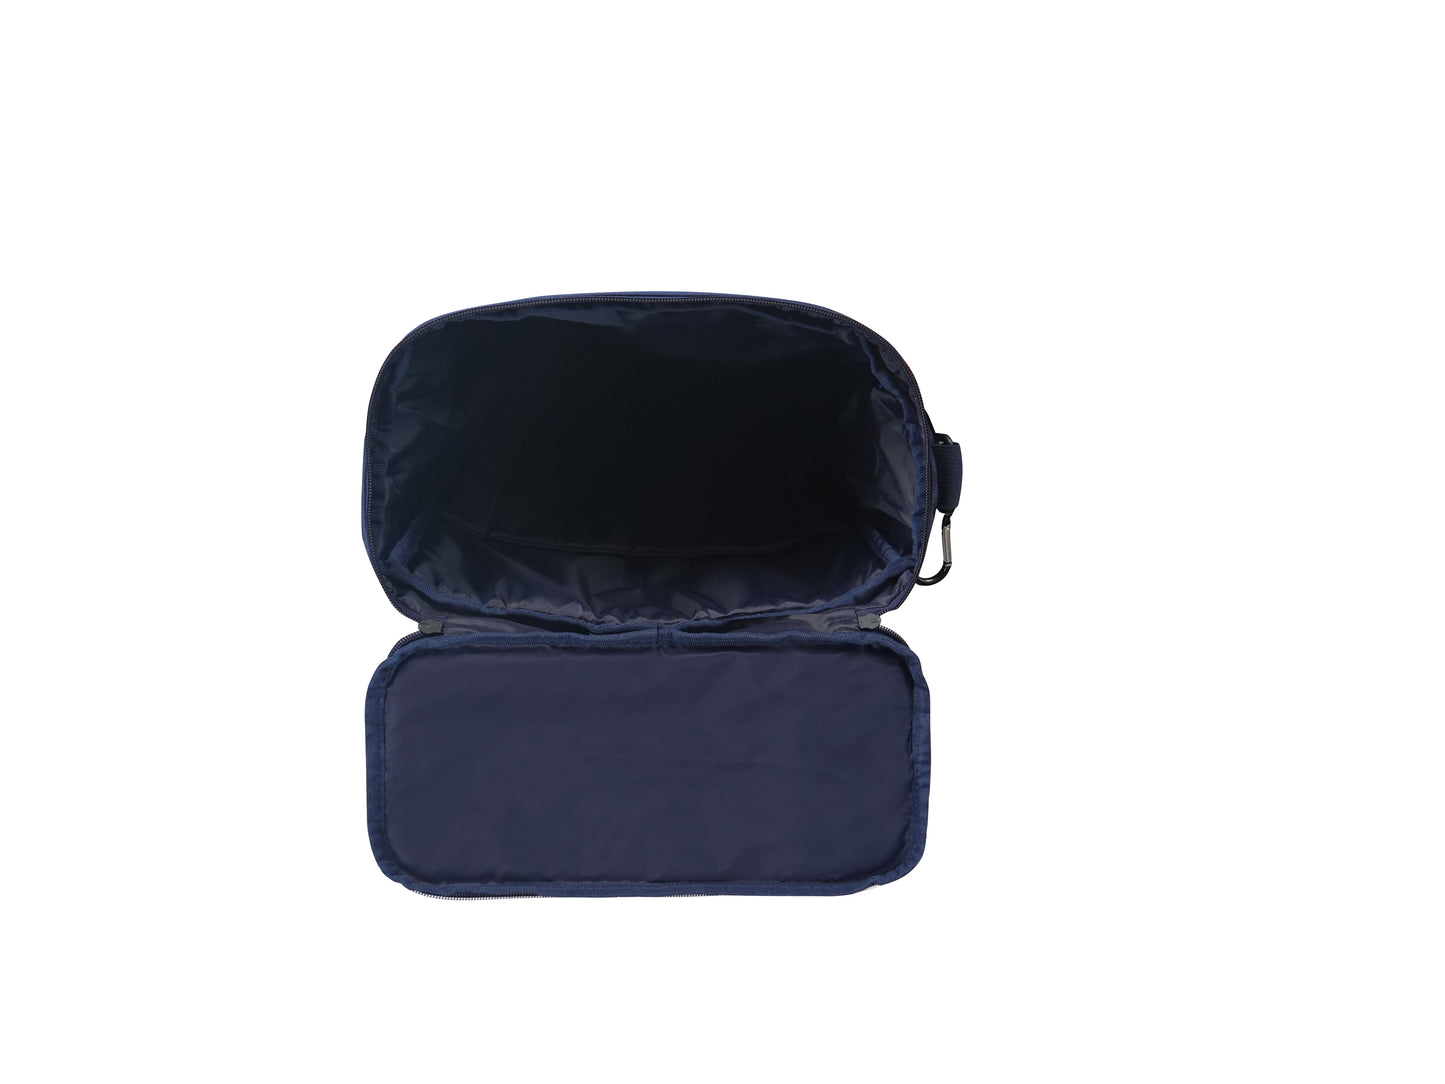 Chard HC - Accra Backpack - Navy